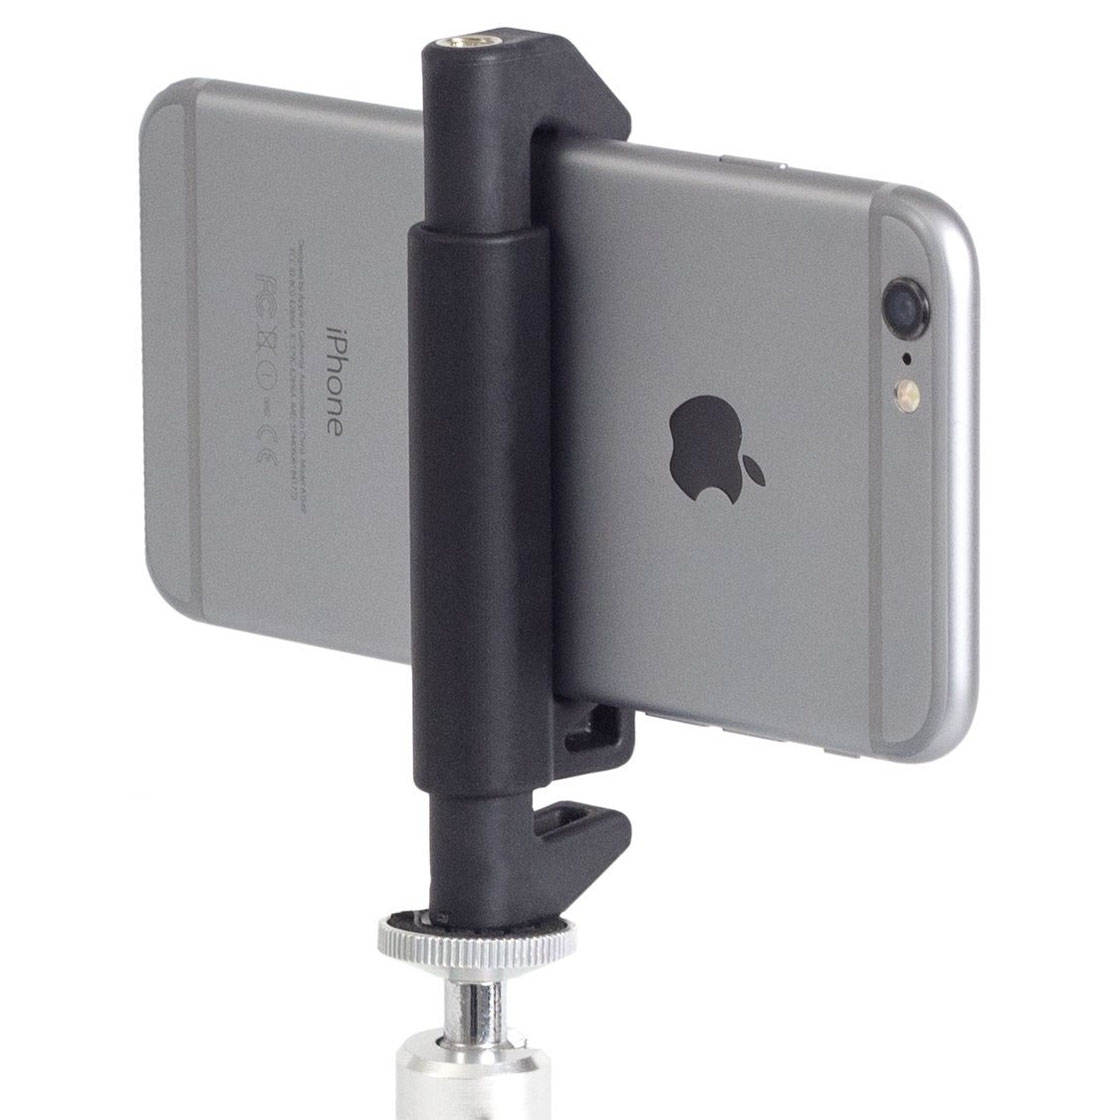 tripod-for-iphone-61